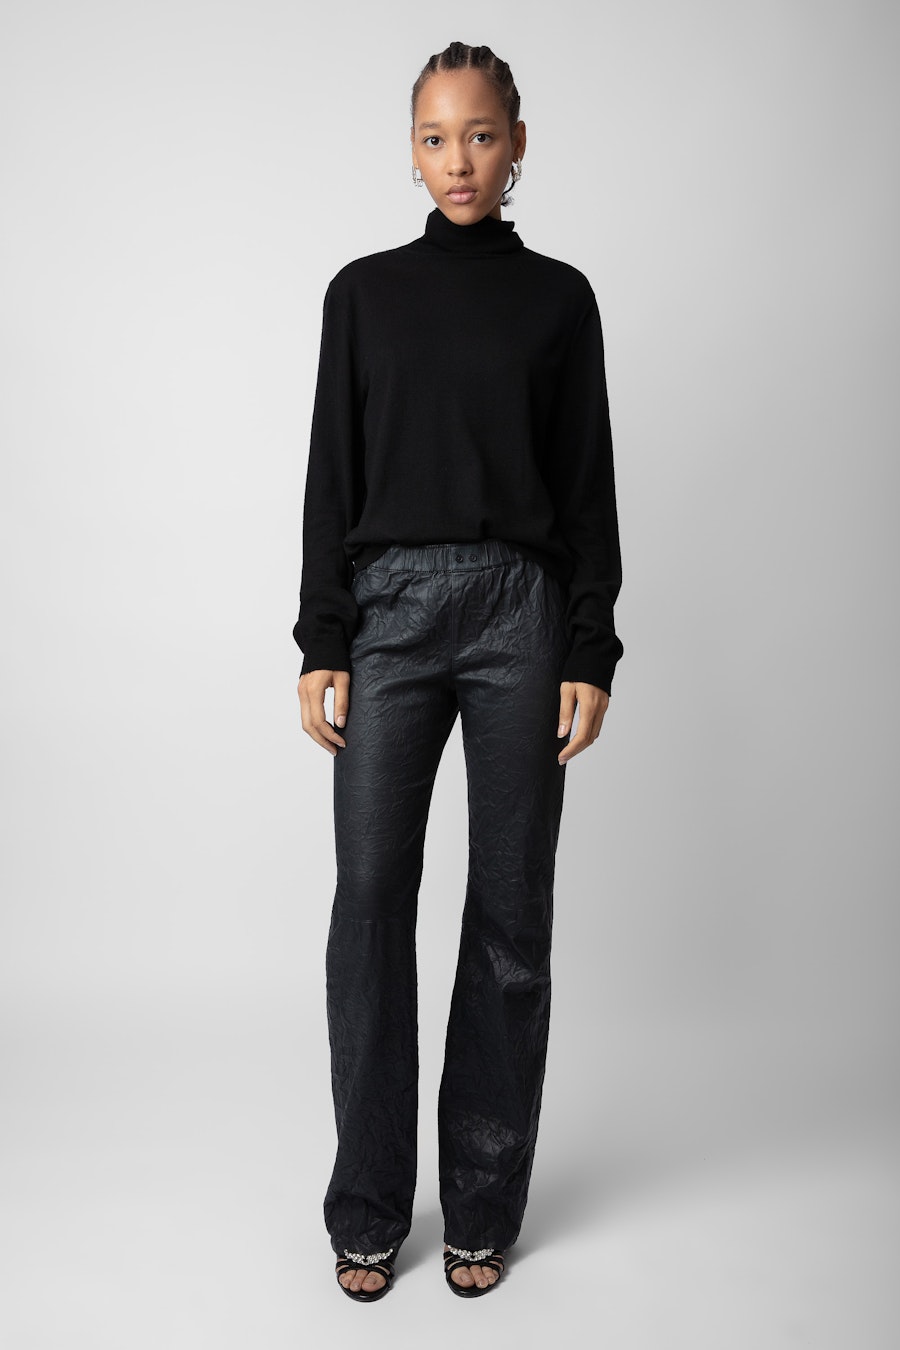 ZADIG&VOLTAIRE Pauline Crinkled Leather Pants